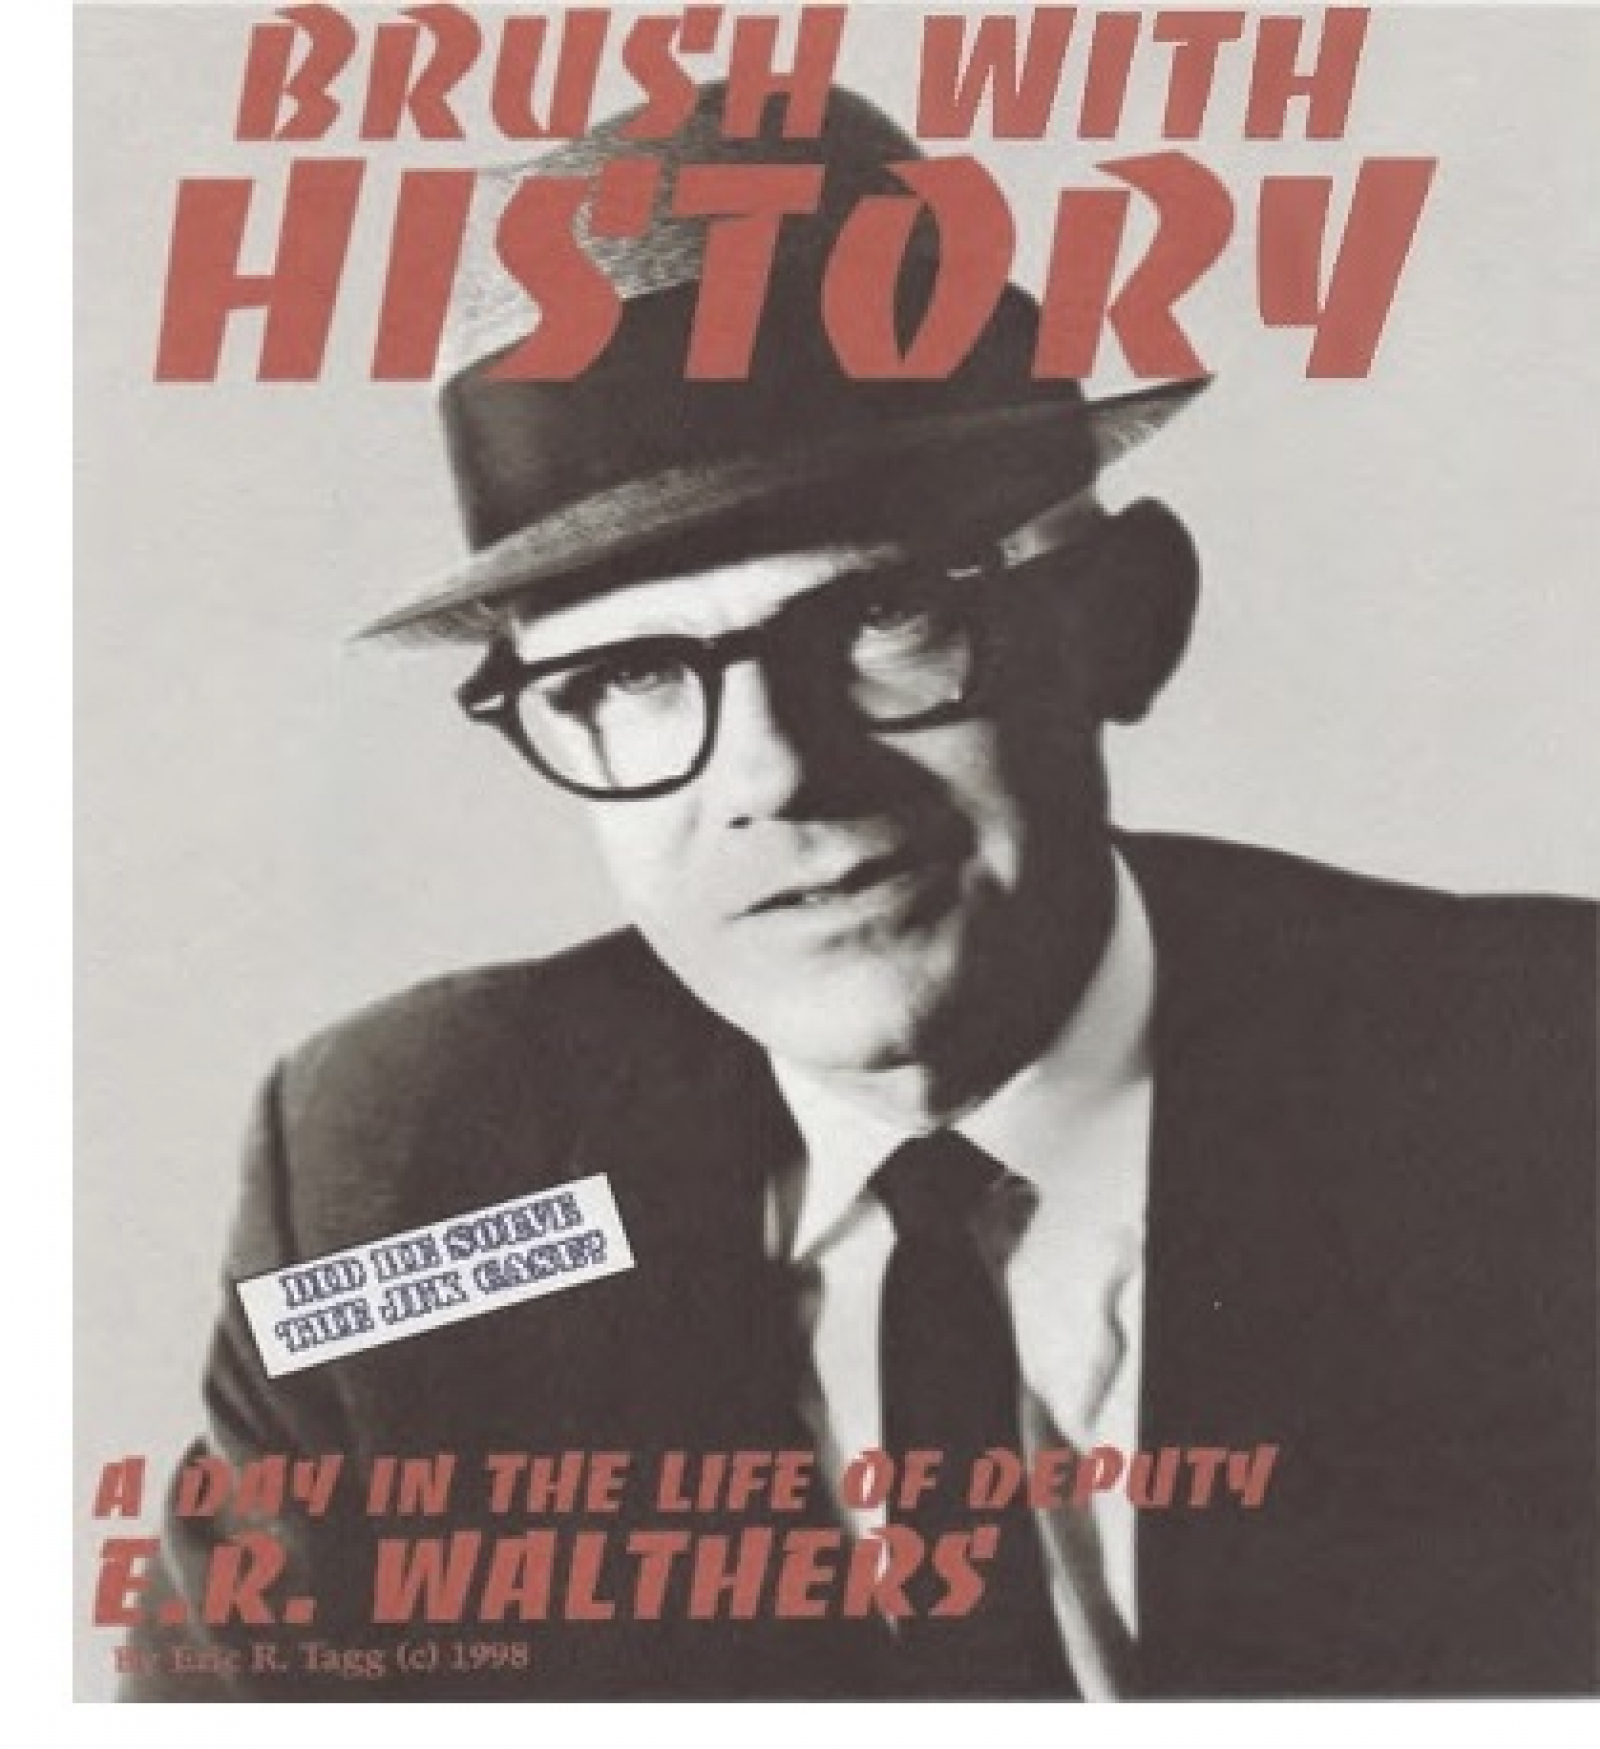 Review of Eric Tagg's “Brush With History”